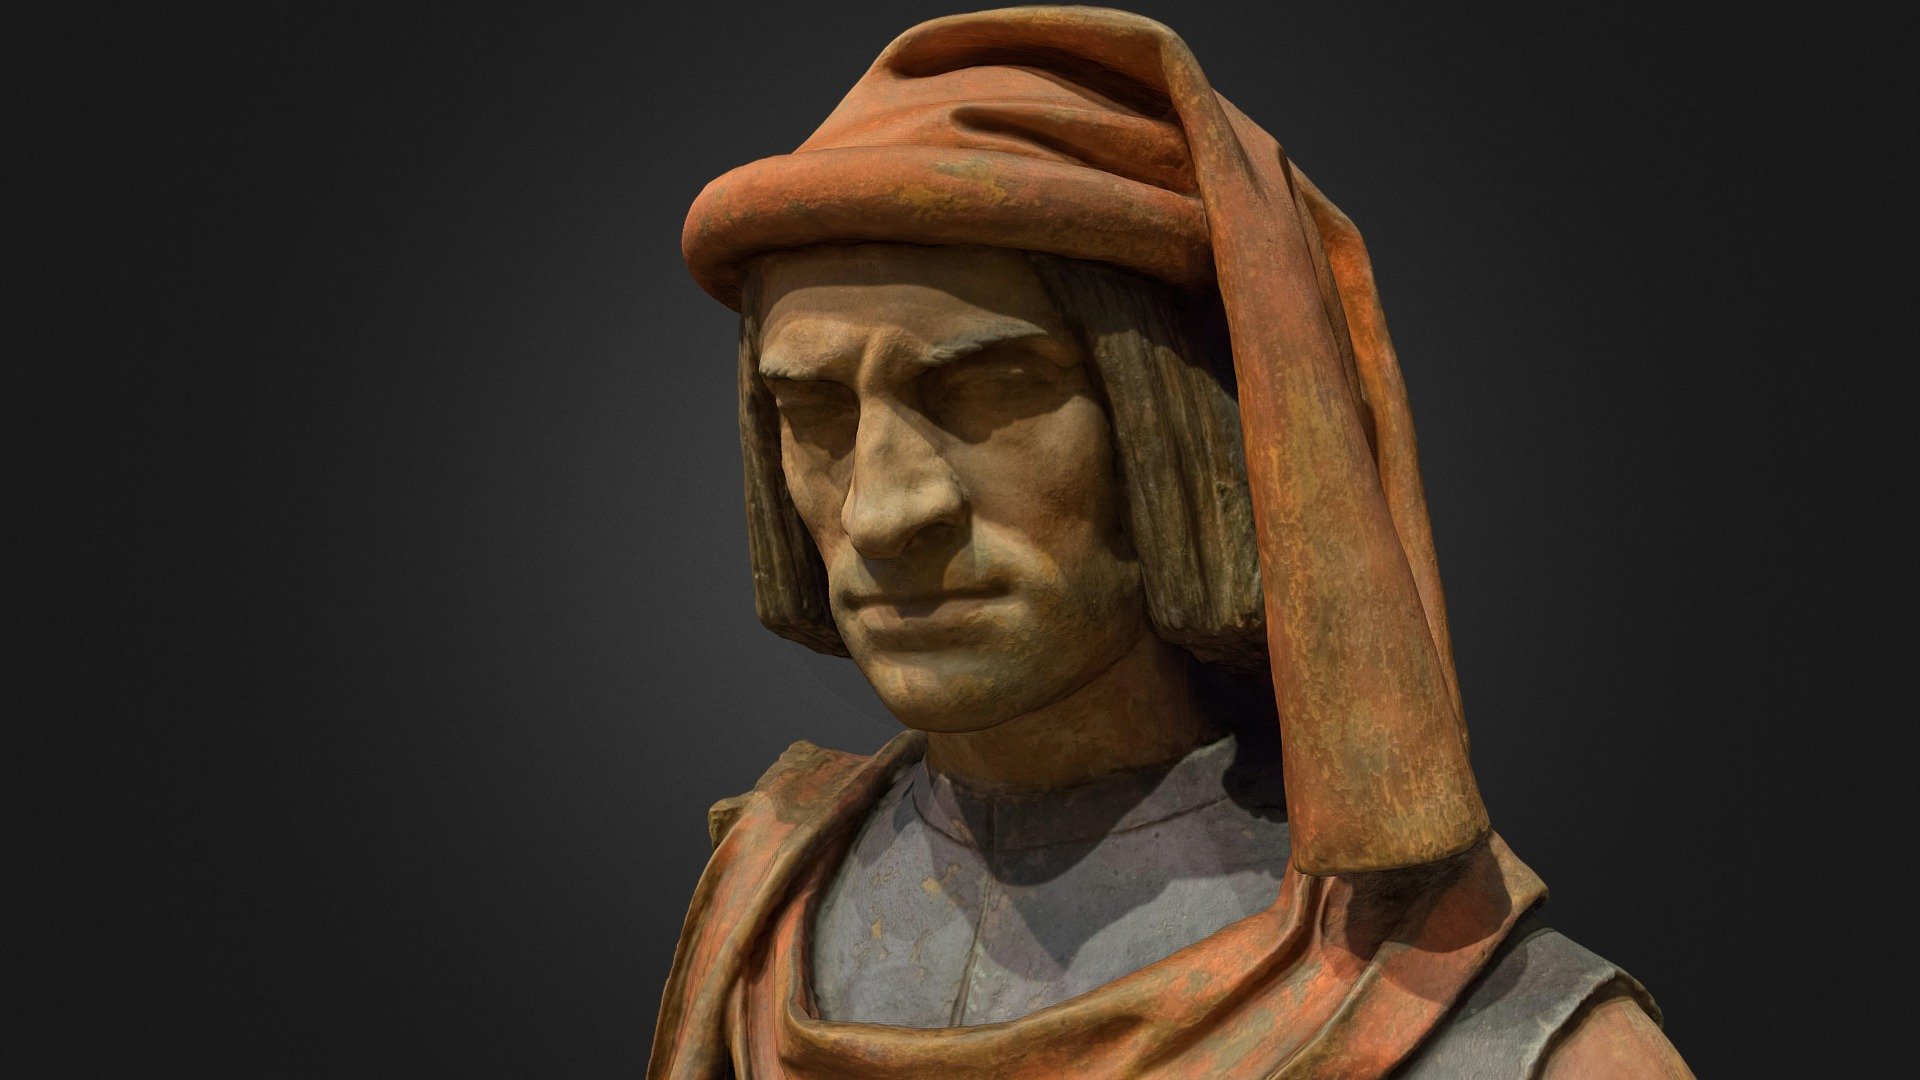 Artist unknown. Florentine, probably after a model by Andrea del Verrocchio and Orsino Benintendi, ca. 1513/1520. Polychrome terracota. National gallery of Art, Washington. Samuel H. Kress Collection. 
Lorenzo, known as the Magnificent, was the unofficial head of state in Florence from 1469 to 1492. After surviving an attack in 1478 at Florence Cathedral by conspirators (who assassinated his brother Giuliano), supporters commissioned life-size wax images of Lorenzo in churches in thanksgiving for his survival. Verrocchio reportedly supervised the wax specialist Orsino Benintendi in making those sculptures. 
This portrait, thought probably made later, may be based on the wax sculpture that was dressed in the clothes Lorenzo wore during the attack. He appeared in that attire at his window later that day to show the crowd he had survived 3d model